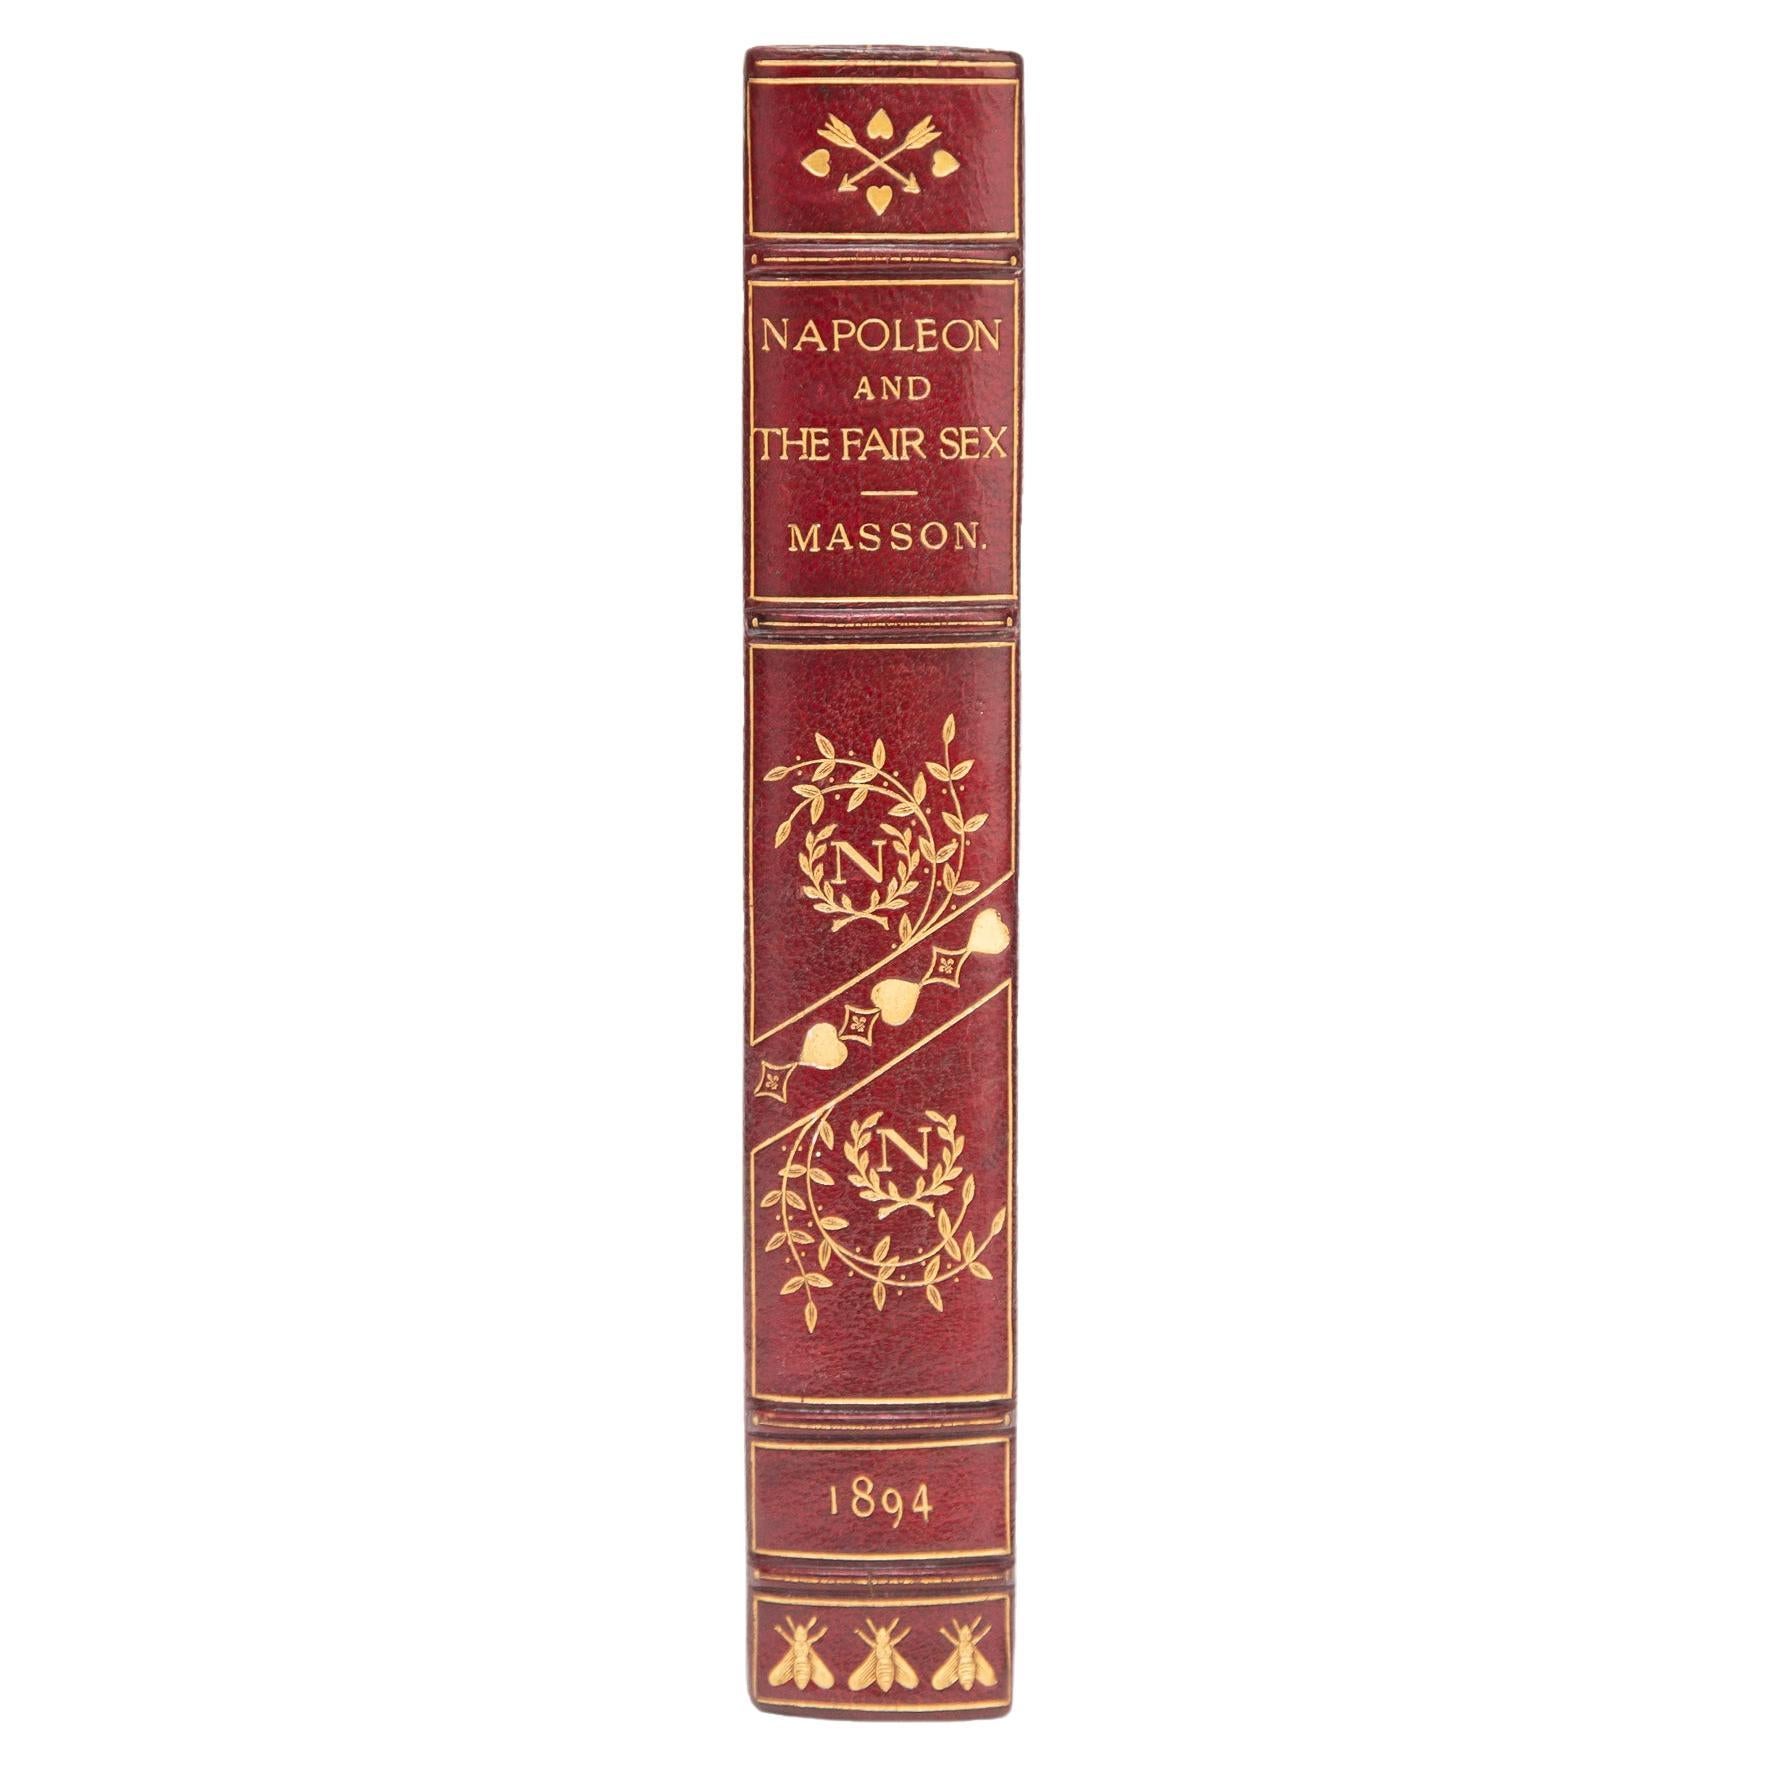 1 Volume, Frederic Masson, Napoleon and the Fair Sex For Sale